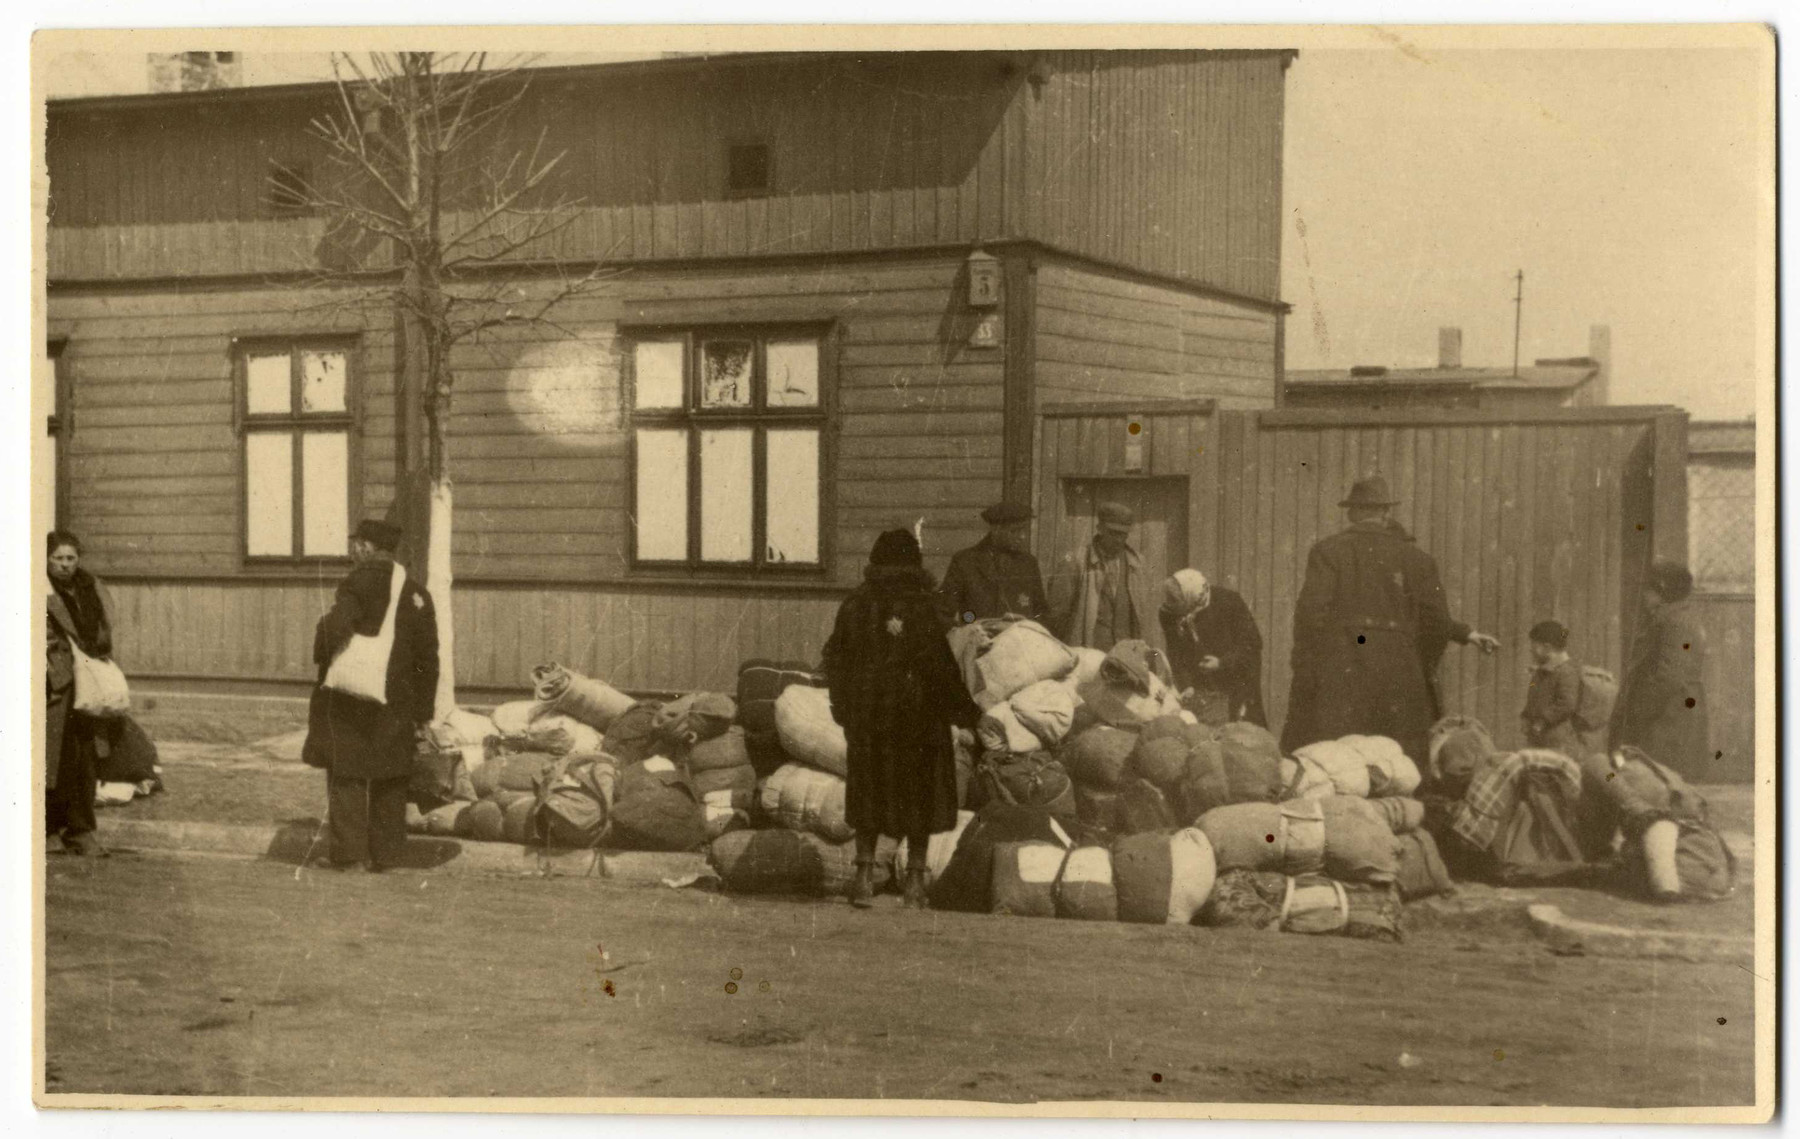 Jews deposit their bundles on the pavement before their deportation from the Lodz ghetto.